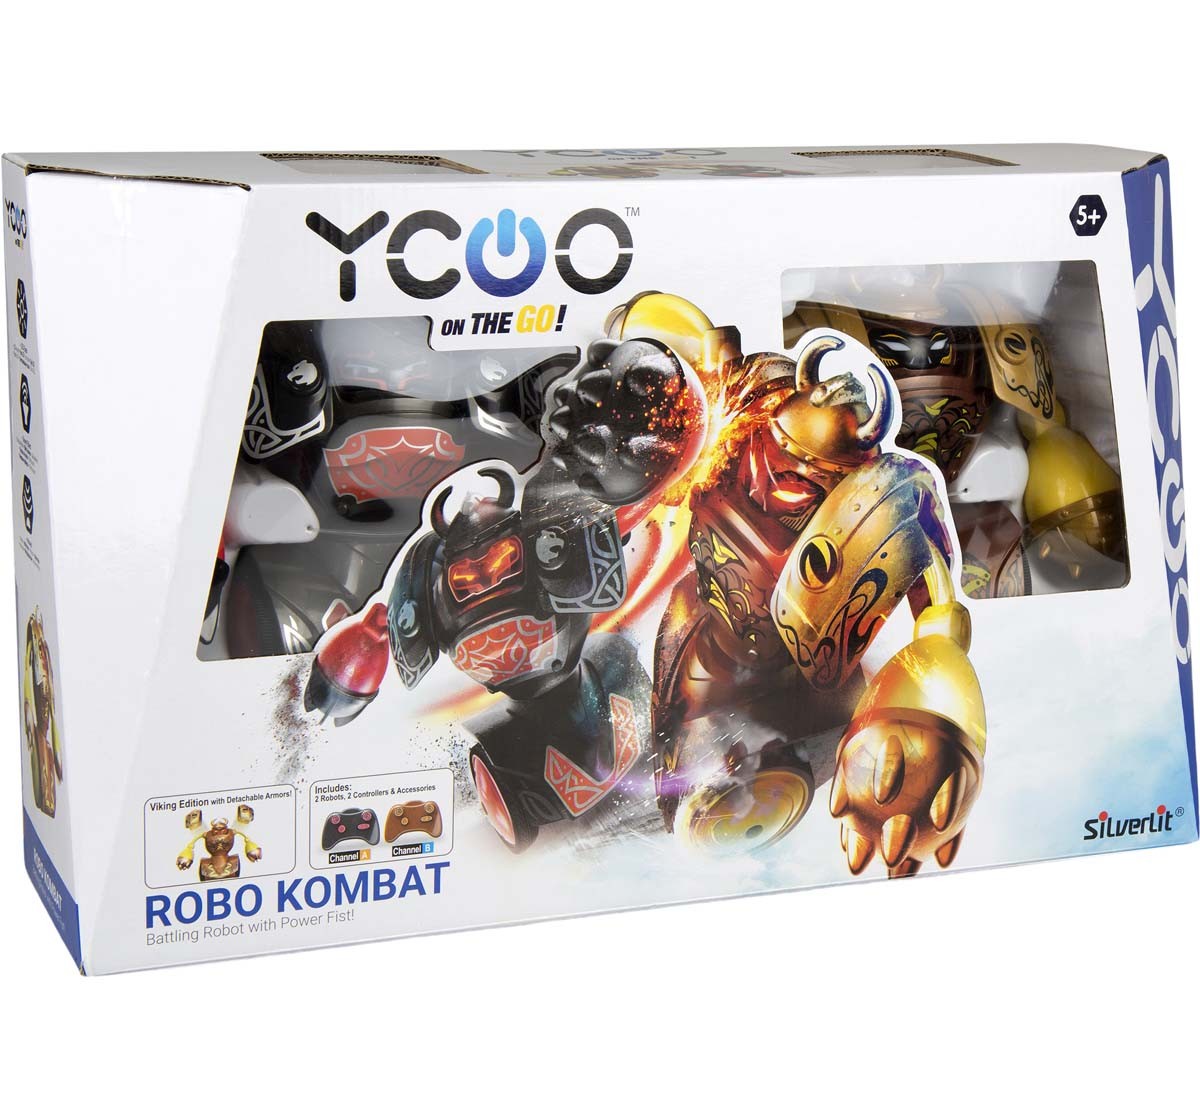 Silverlit Ycoo Robo Kombat Viking Battling Robots With Power Fist (Twin Pack) With Remote Control for Kids Age 5Y+